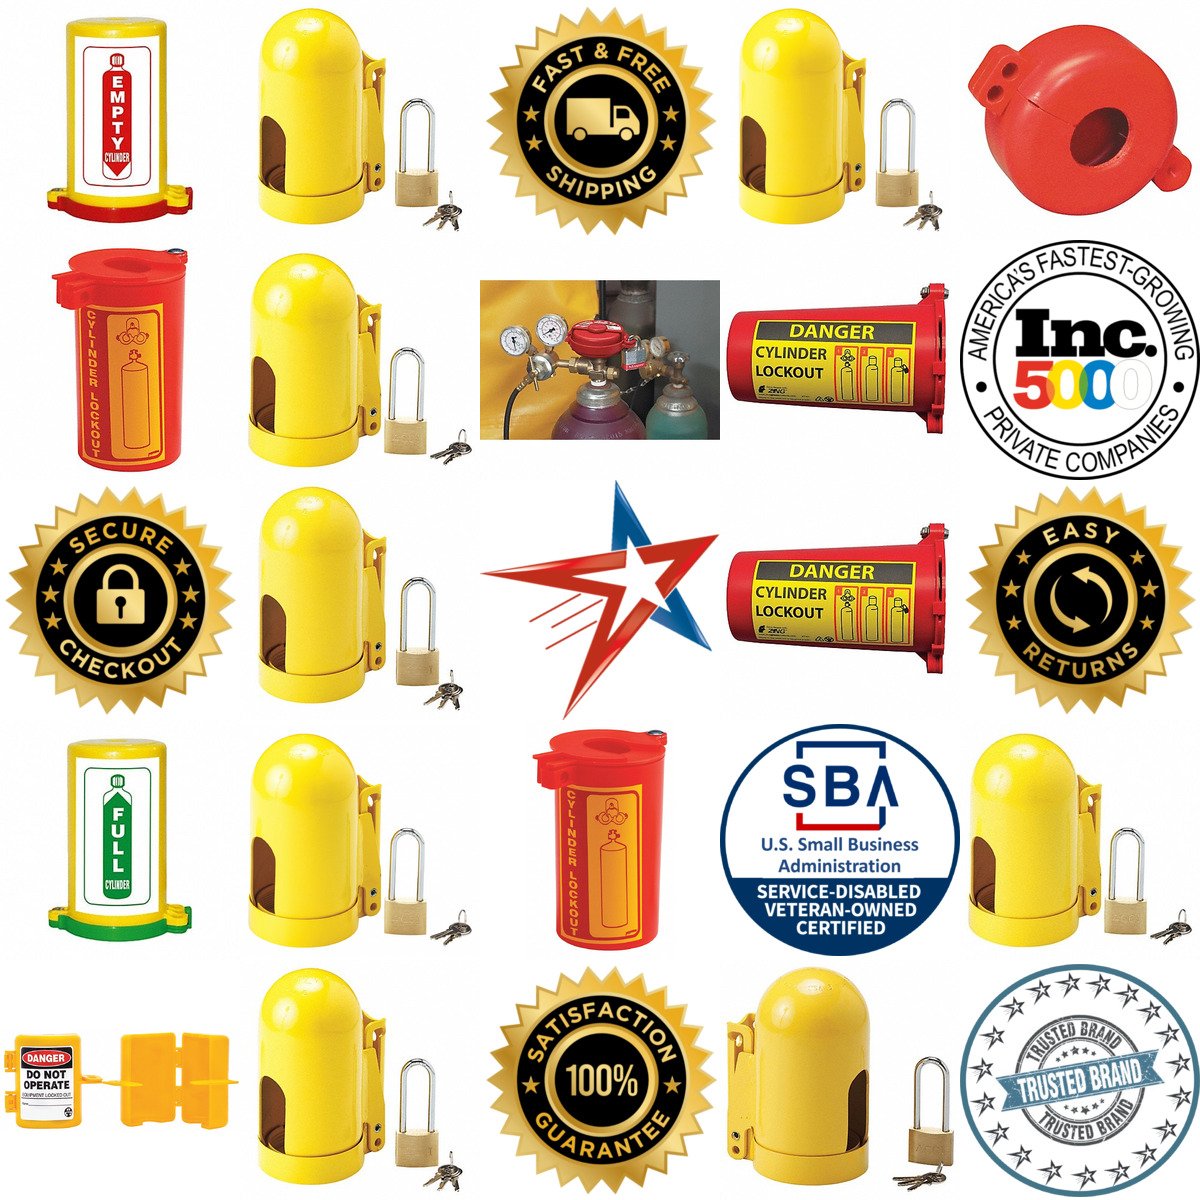 A selection of Gas Cylinder Lockouts products on GoVets